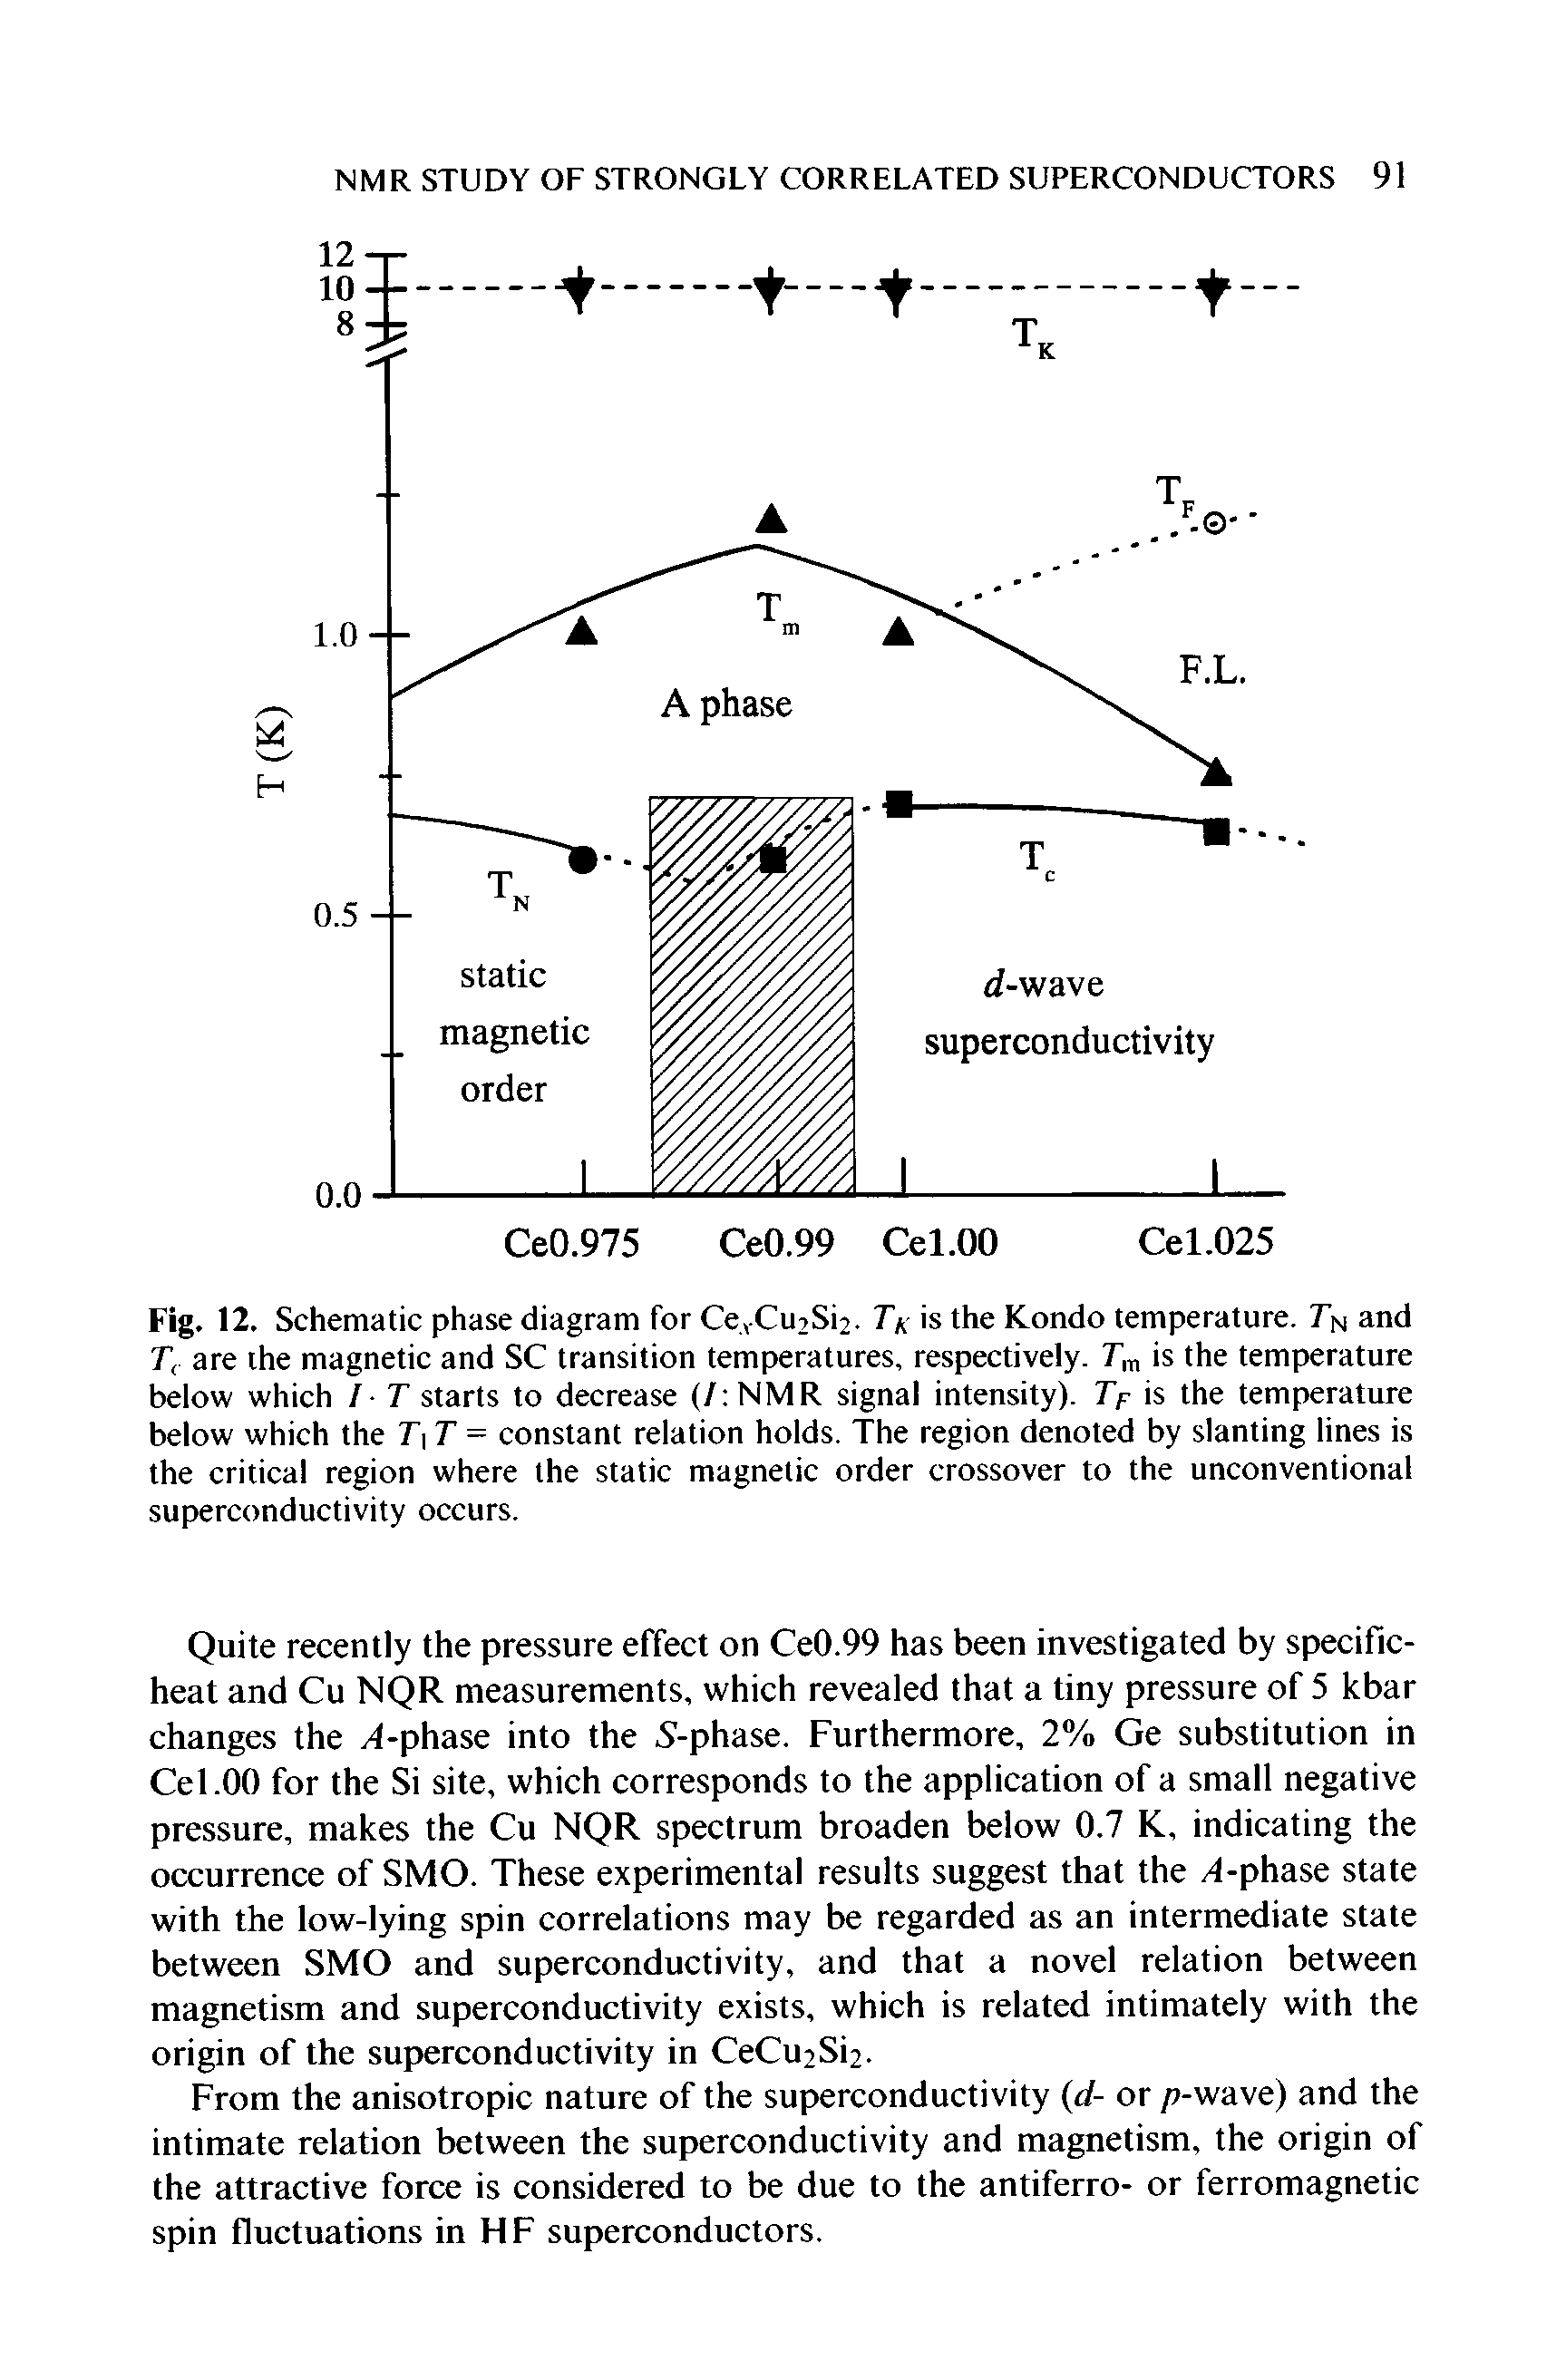 Fig. 12. Schematic phase diagram for CevCii2Si2. 7V is the Rondo temperature. TN and T( are the magnetic and SC transition temperatures, respectively. Tm is the temperature below which / T starts to decrease (/ NMR signal intensity). 7> is the temperature below which the T T = constant relation holds. The region denoted by slanting lines is the critical region where the static magnetic order crossover to the unconventional superconductivity occurs.